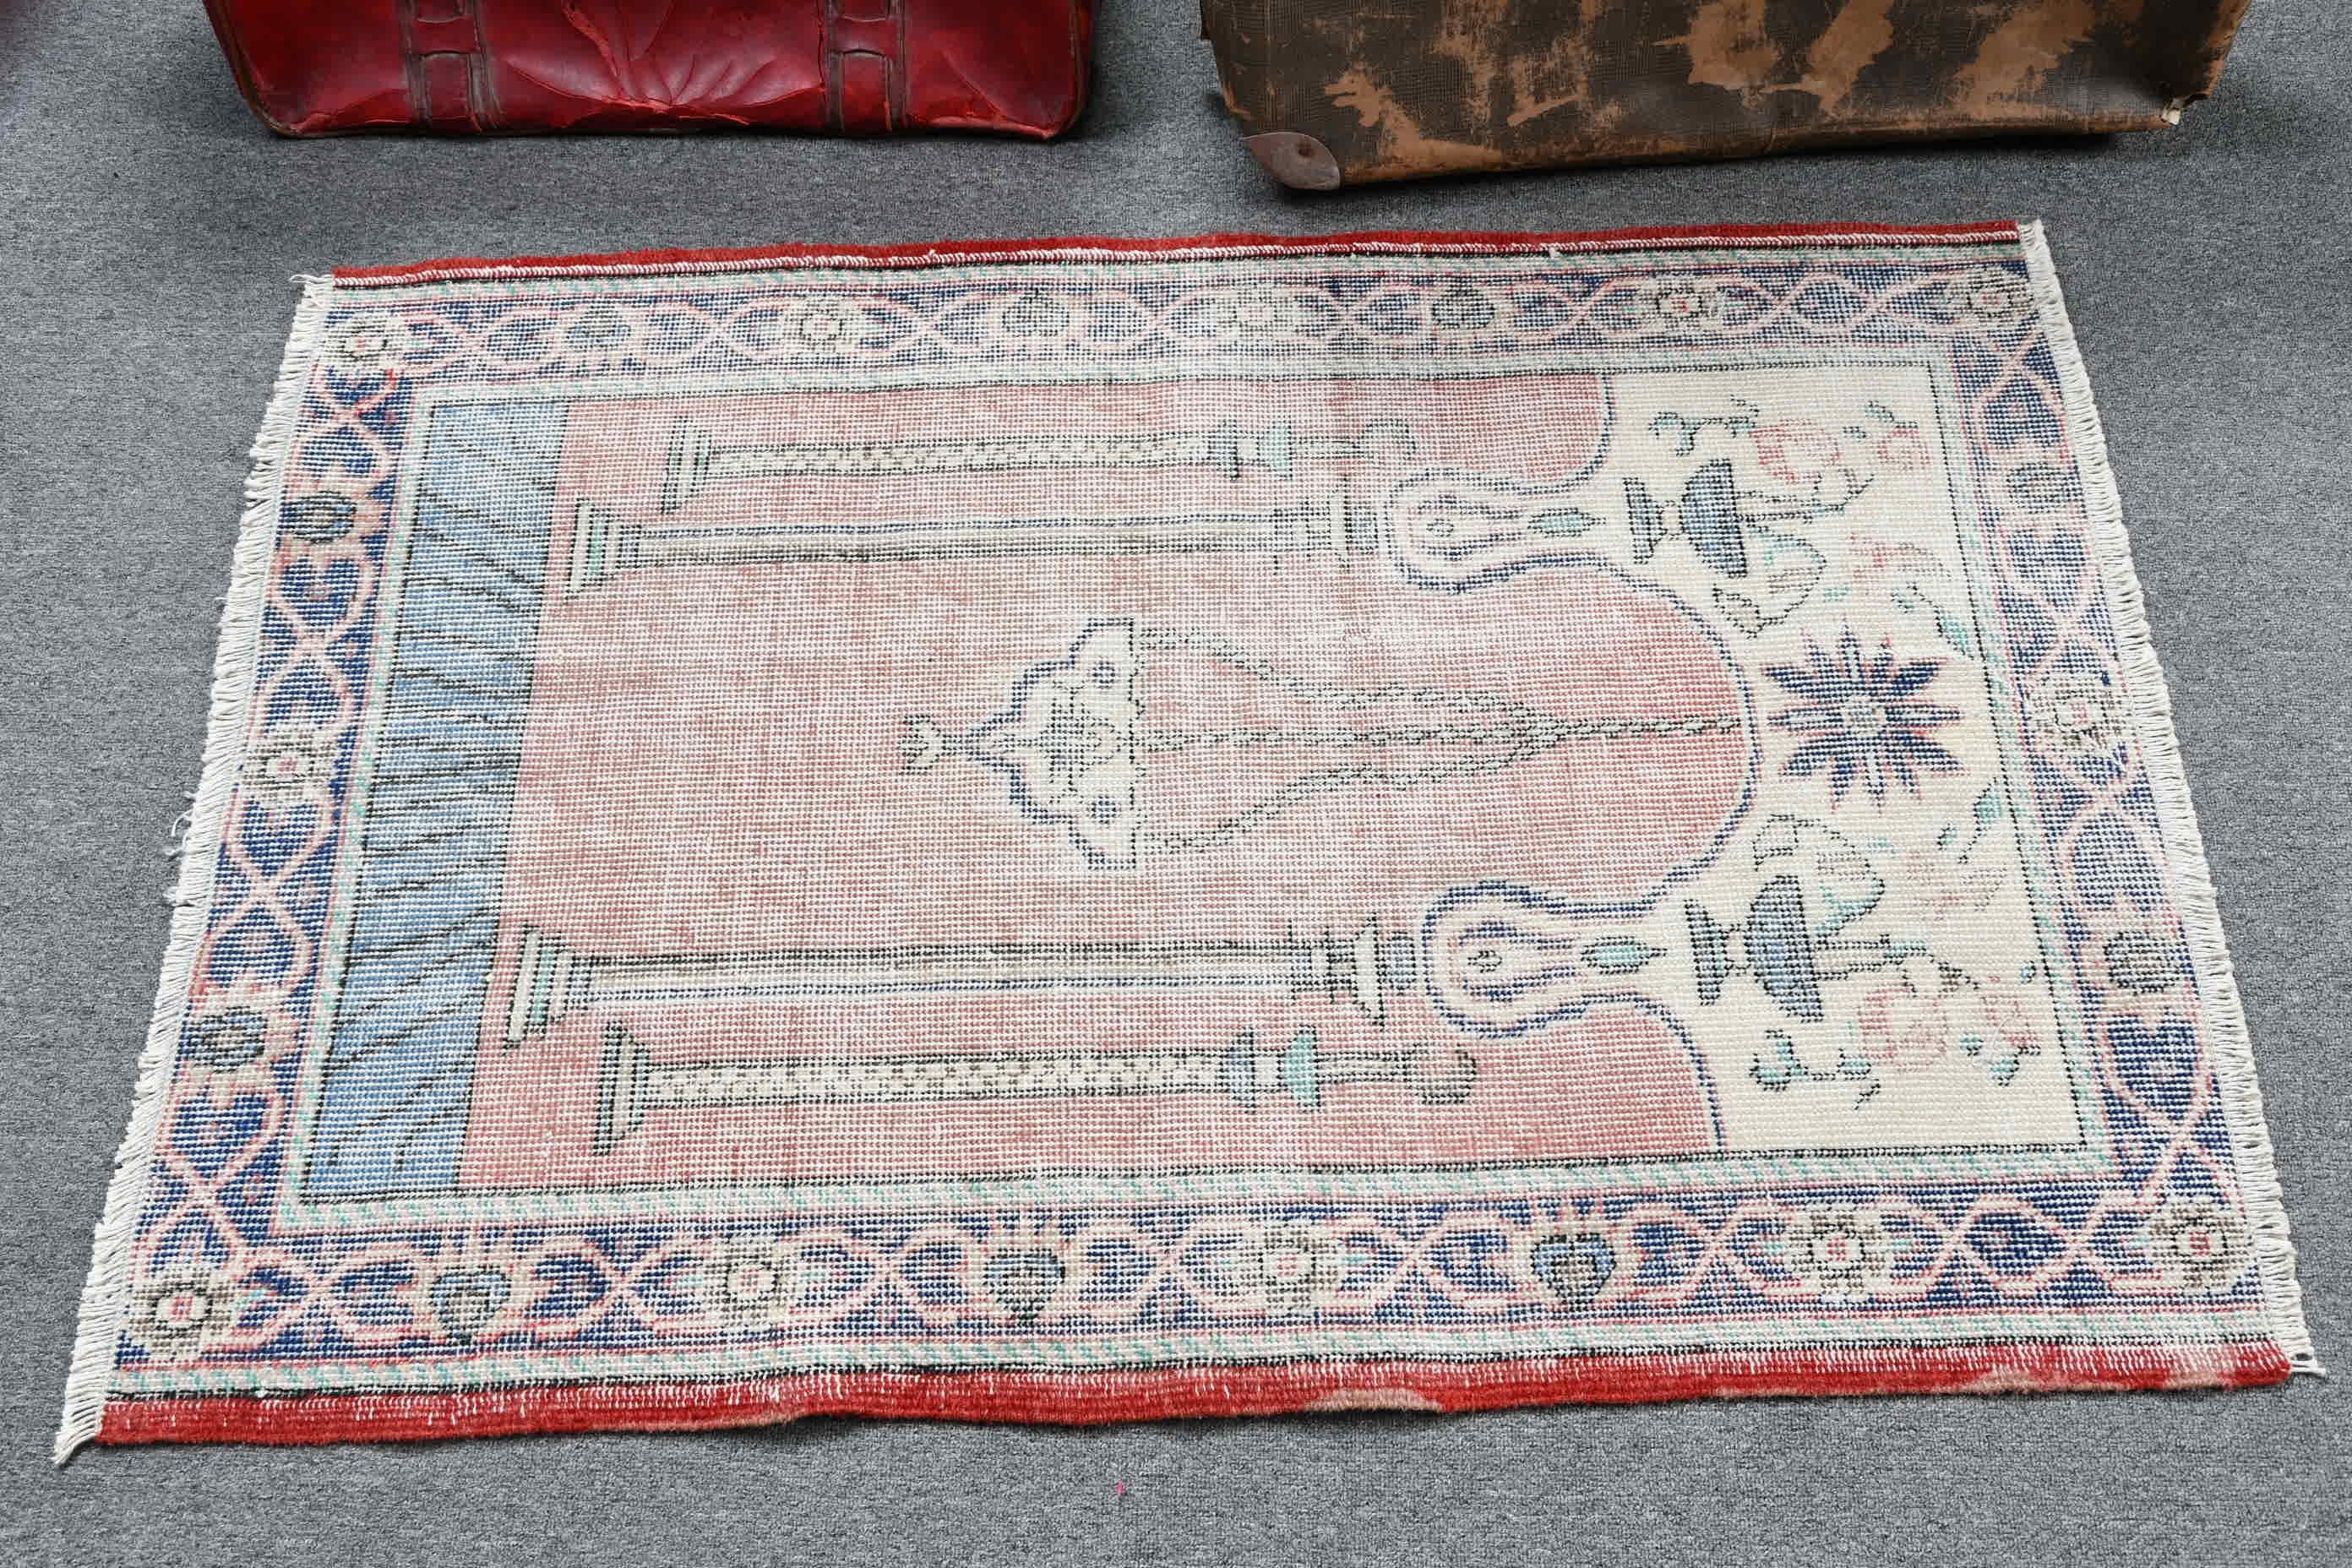 Rugs for Car Mat, Vintage Rug, Wall Hanging Rug, Bath Rug, Turkish Rugs, 2.7x4 ft Small Rug, Kitchen Rug, Red Moroccan Rug